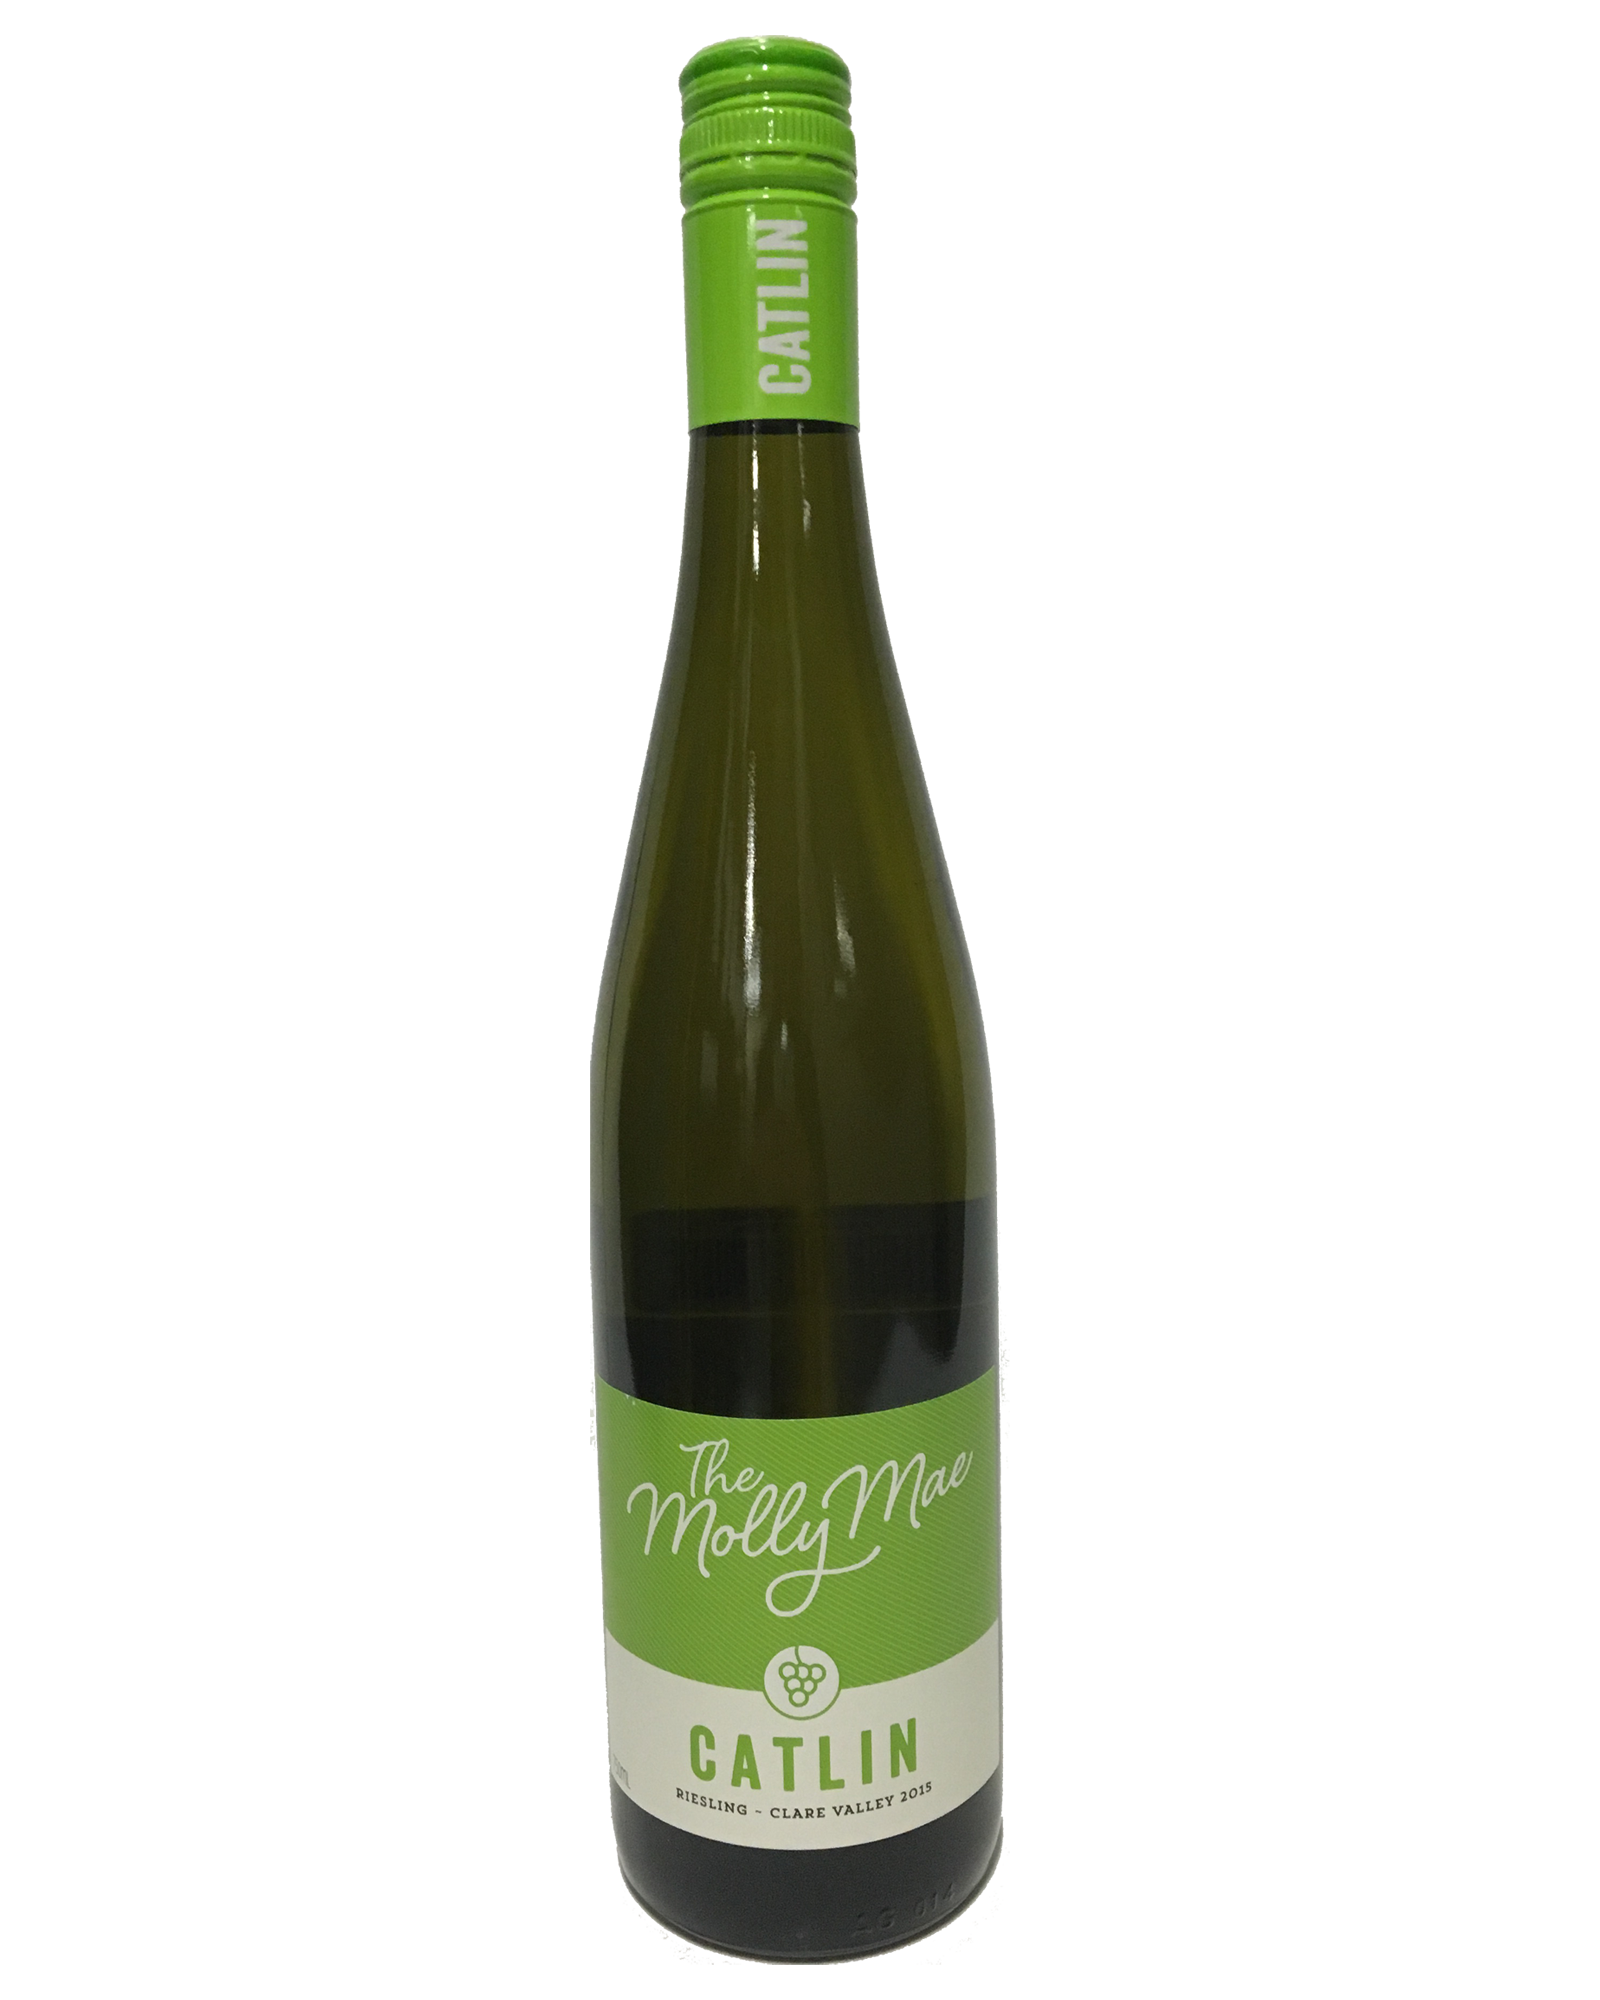 Catlin Molly Mae Riesling